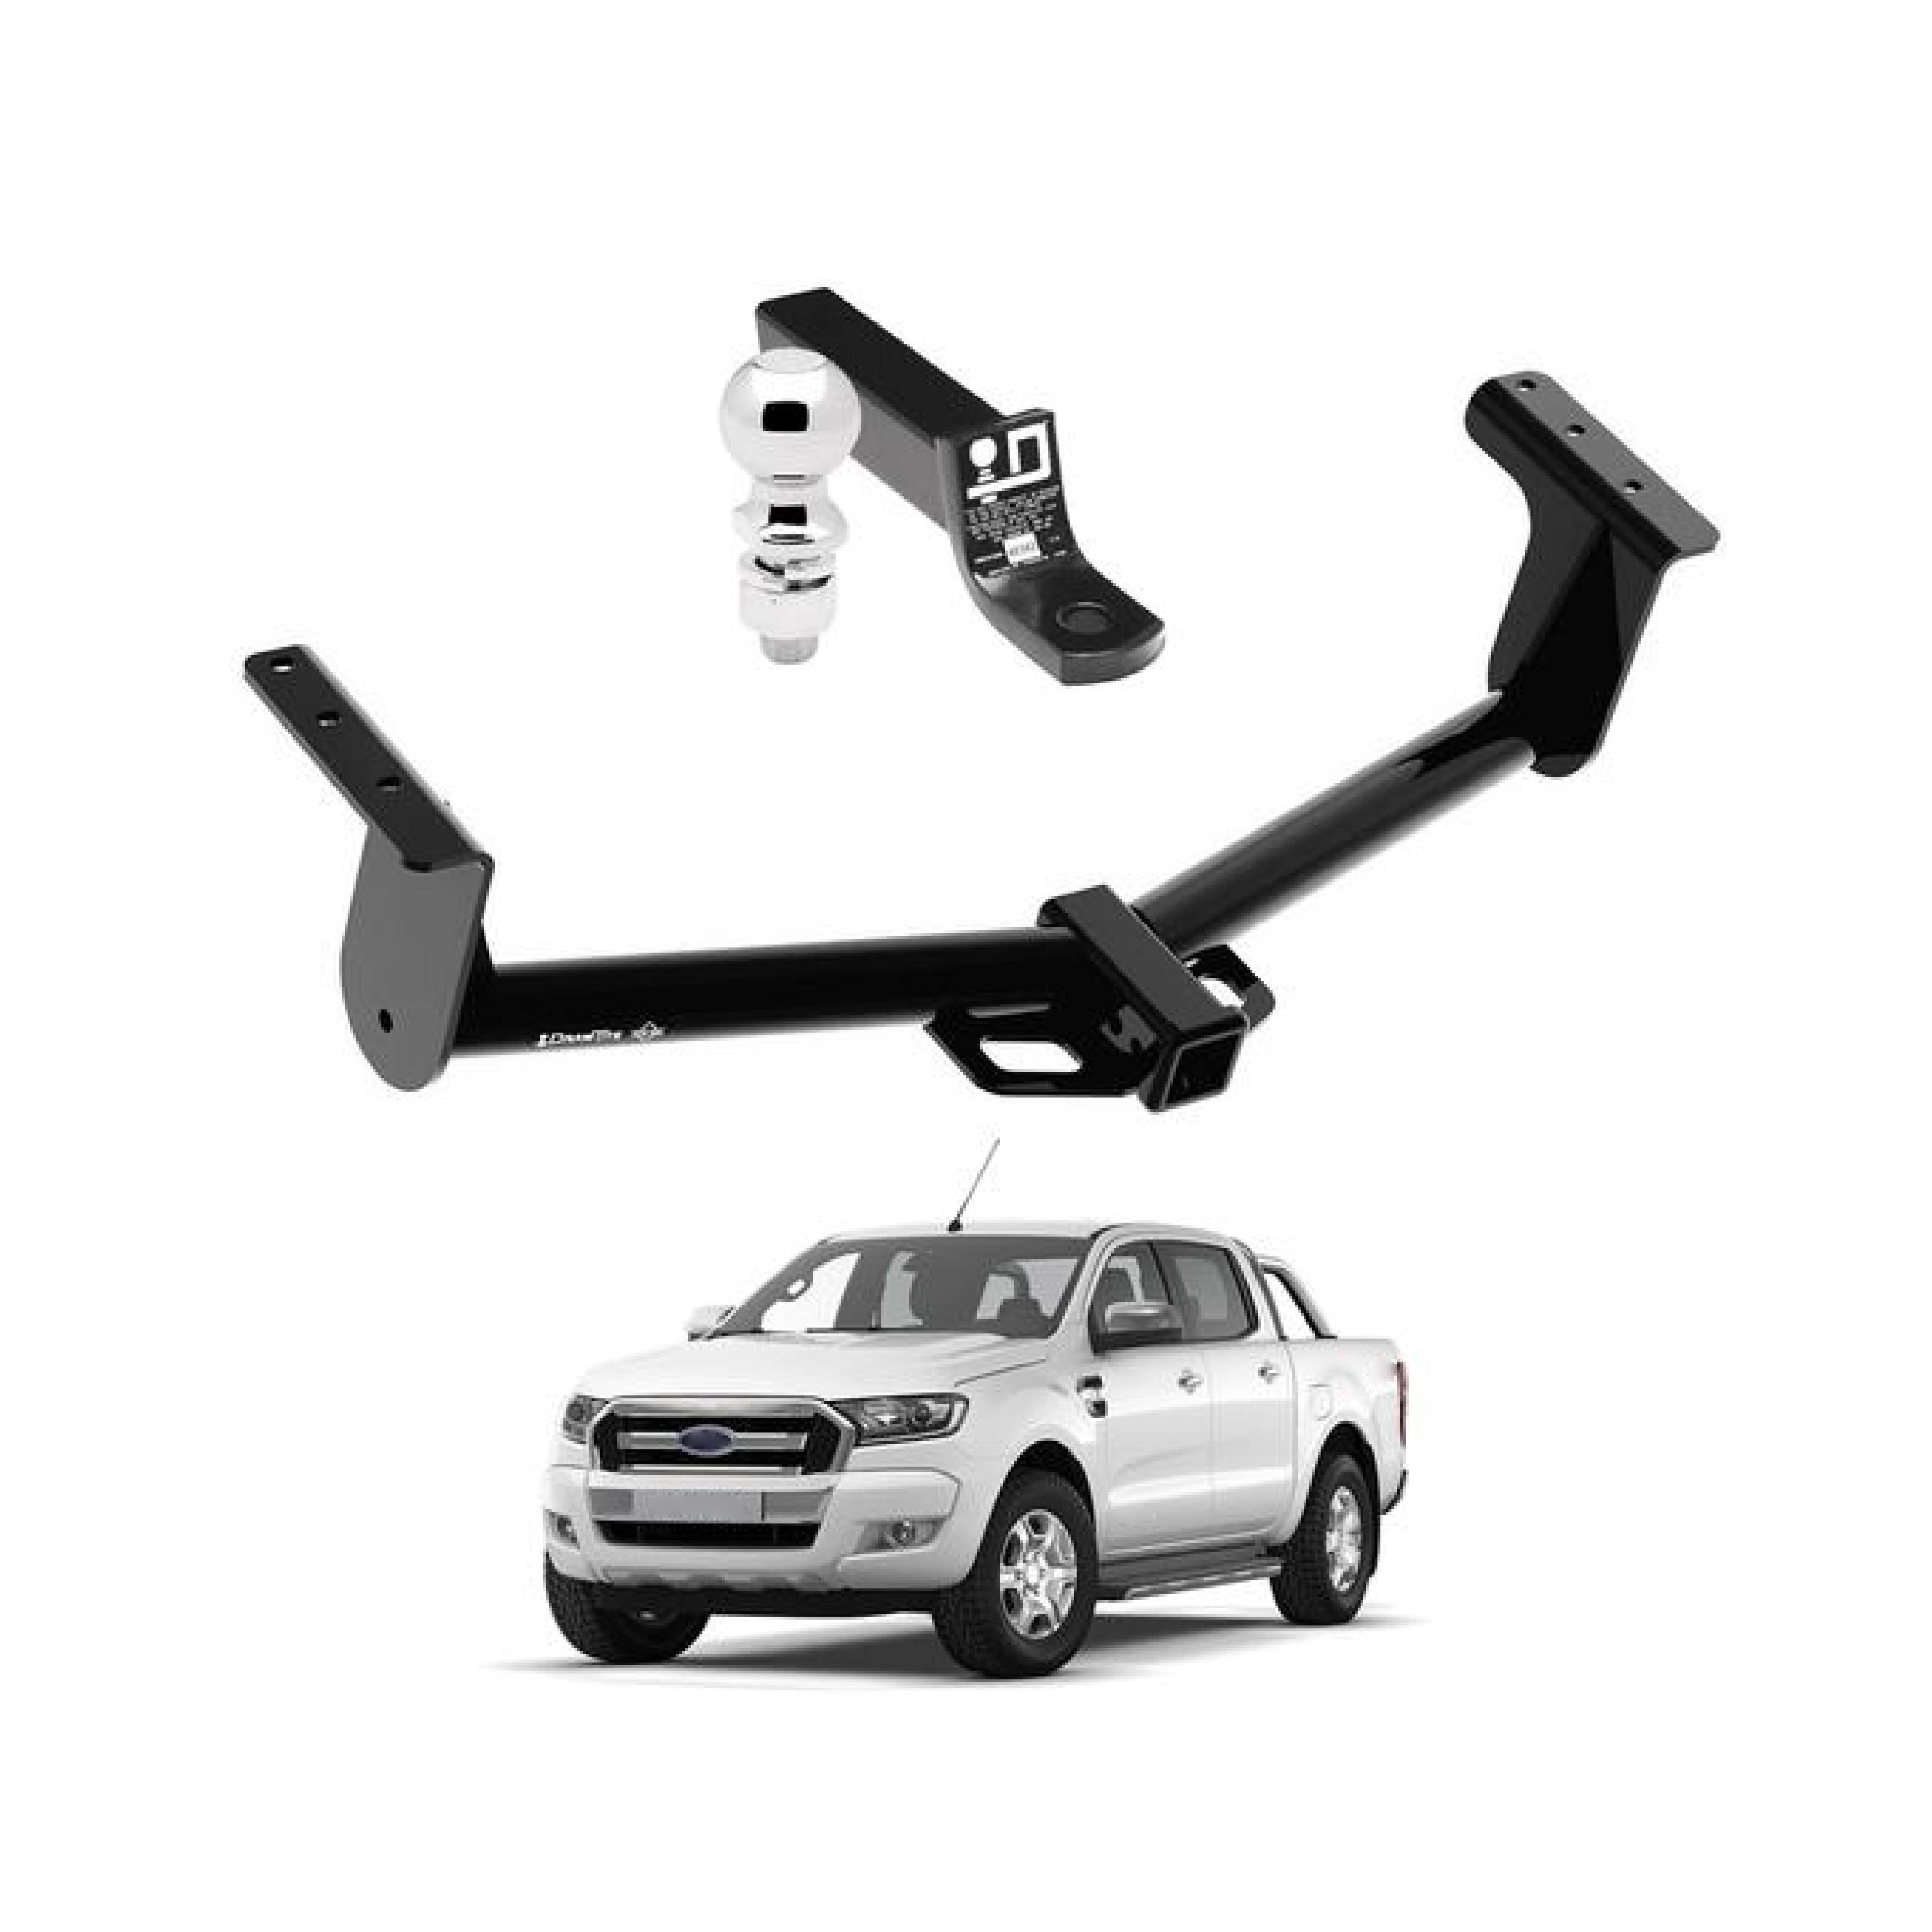 Draw Tite Towing Kit (Frame Receiver + Ball Mount) for 2012-2019 Ford Ranger